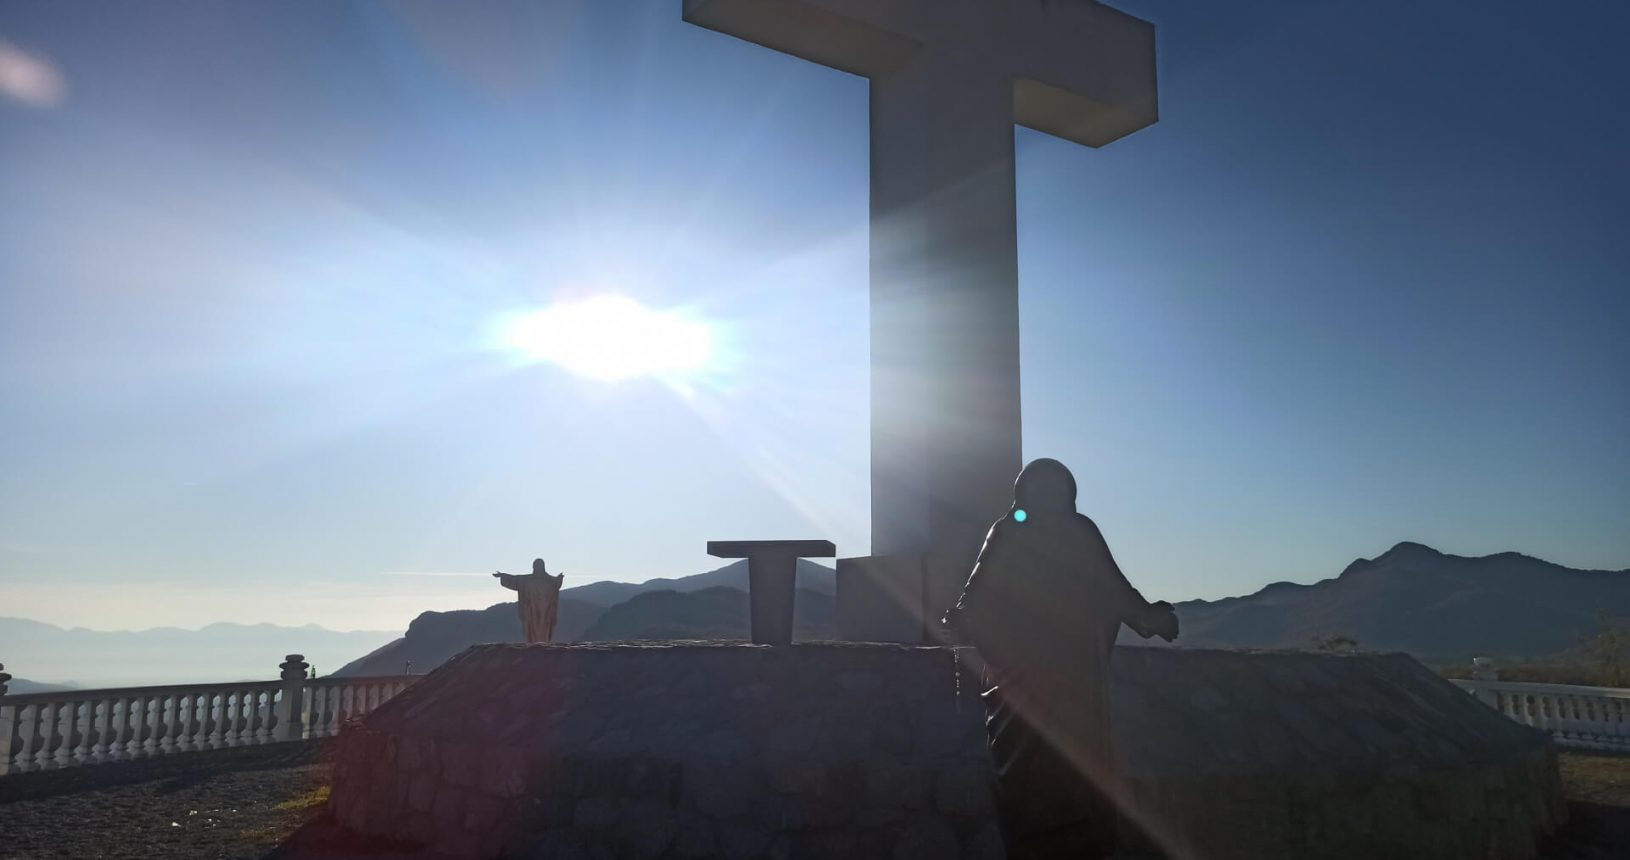 Mother Teresa Jesus and cross Viewpoint with big cross and Jesus